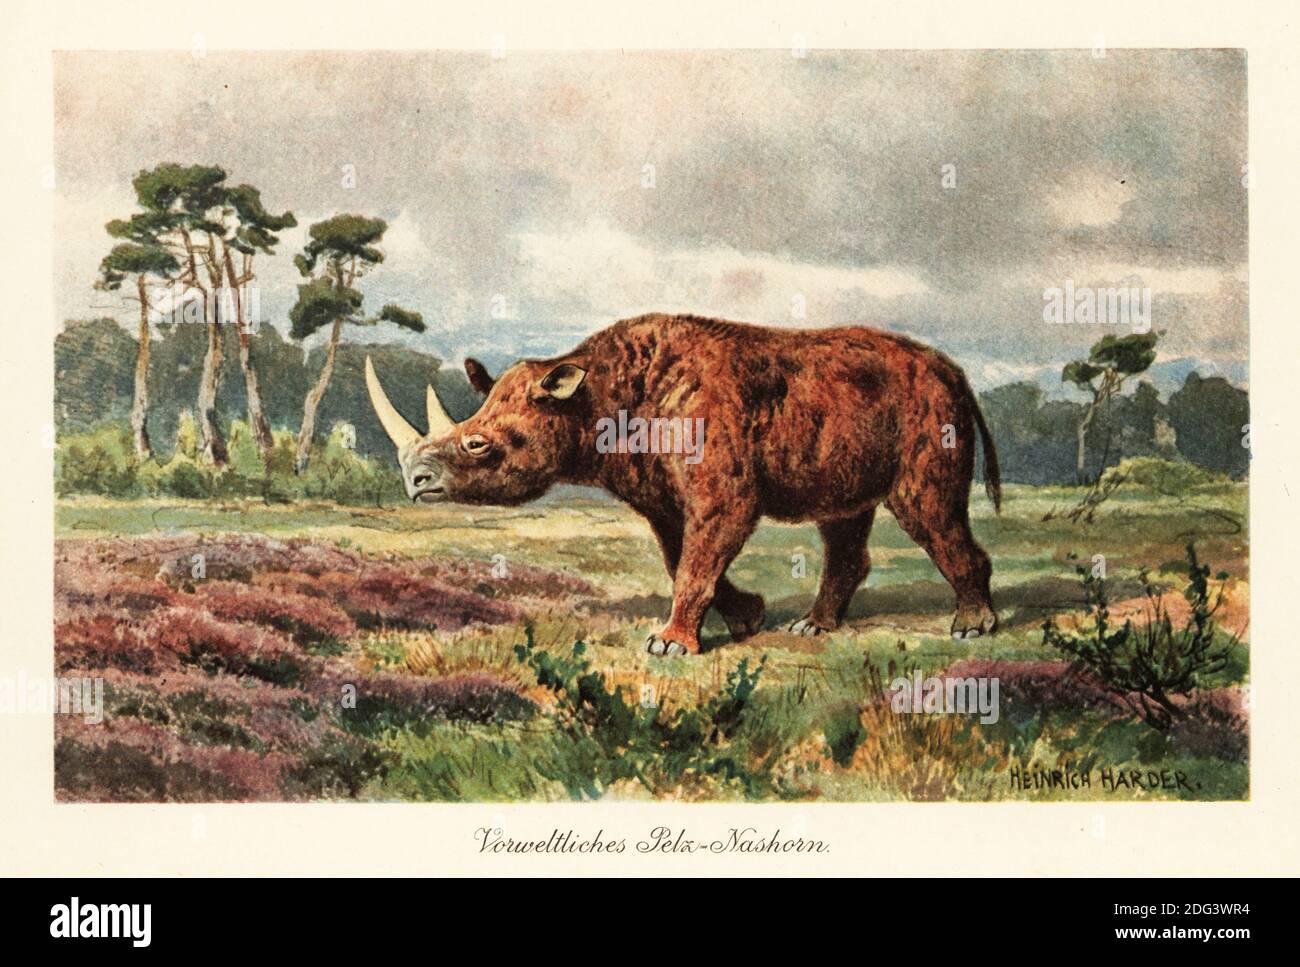 Woolly rhinoceros, Coelodonta antiquitatis, on the steppes. Extinct species of rhinoceros native to the northern steppes of Eurasia, Pleistocene to the last glacial period. Vorweltliches Pelz-Nashorn. Colour printed illustration by Heinrich Harder from Wilhelm Bolsche’s Tiere der Urwelt (Animals of the Prehistoric World), Reichardt Cocoa company, Hamburg, 1908. Heinrich Harder (1858-1935) was a German landscape artist and book illustrator. Stock Photo